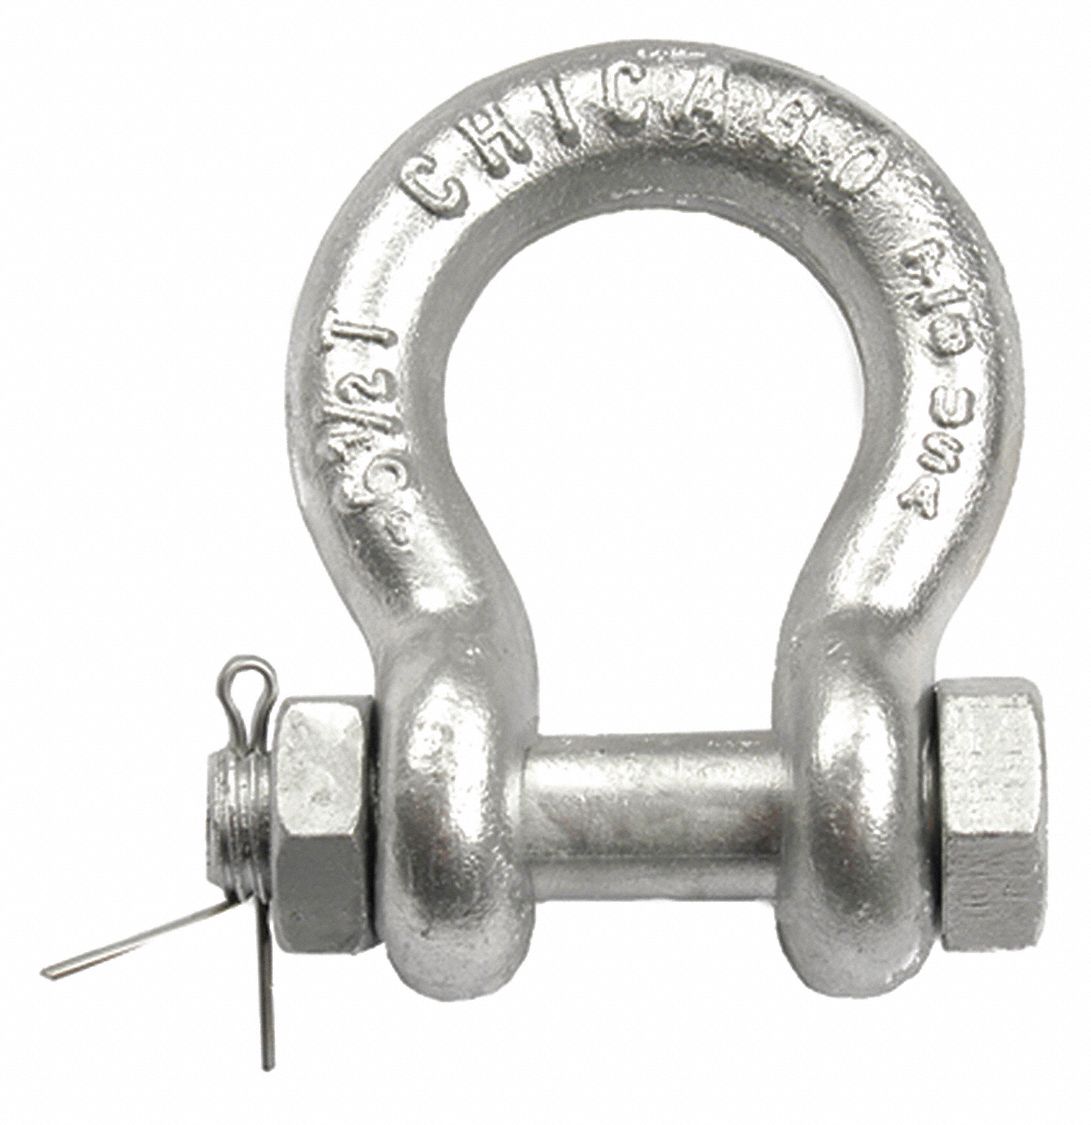 Anchor Shackle: Bolt/Cotter/Nut Pin, 2,000 lb Working Load Limit, 7/16 in Pin Dia.